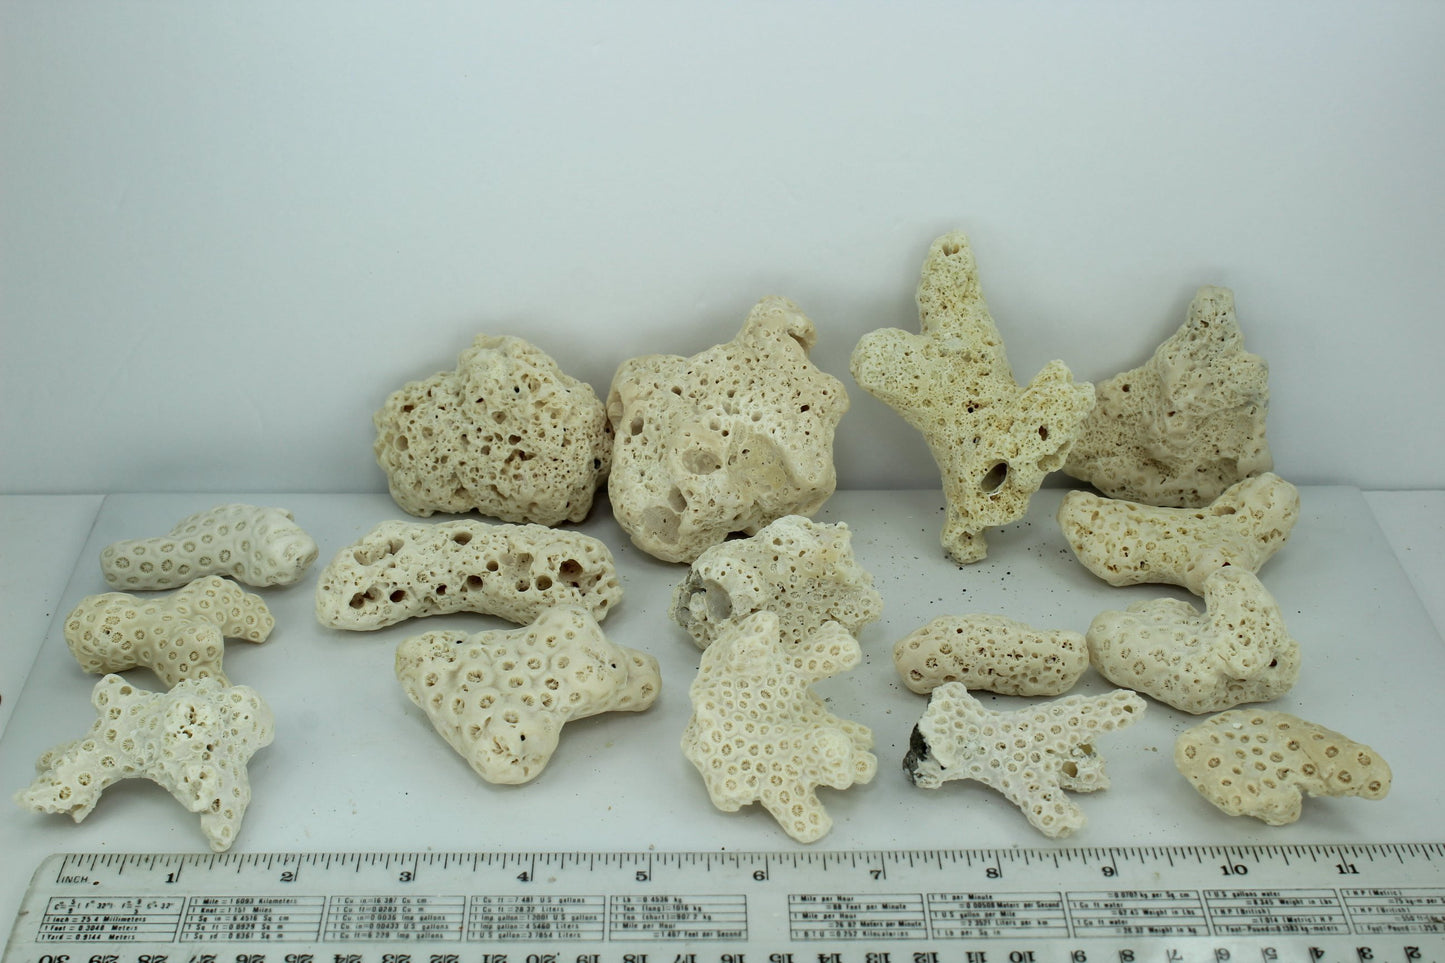 Natural Coral Fossils 16 Small Pieces 3 1/2" to 32 Vintage Estate Collection Aquarium Shell Art Collectibles